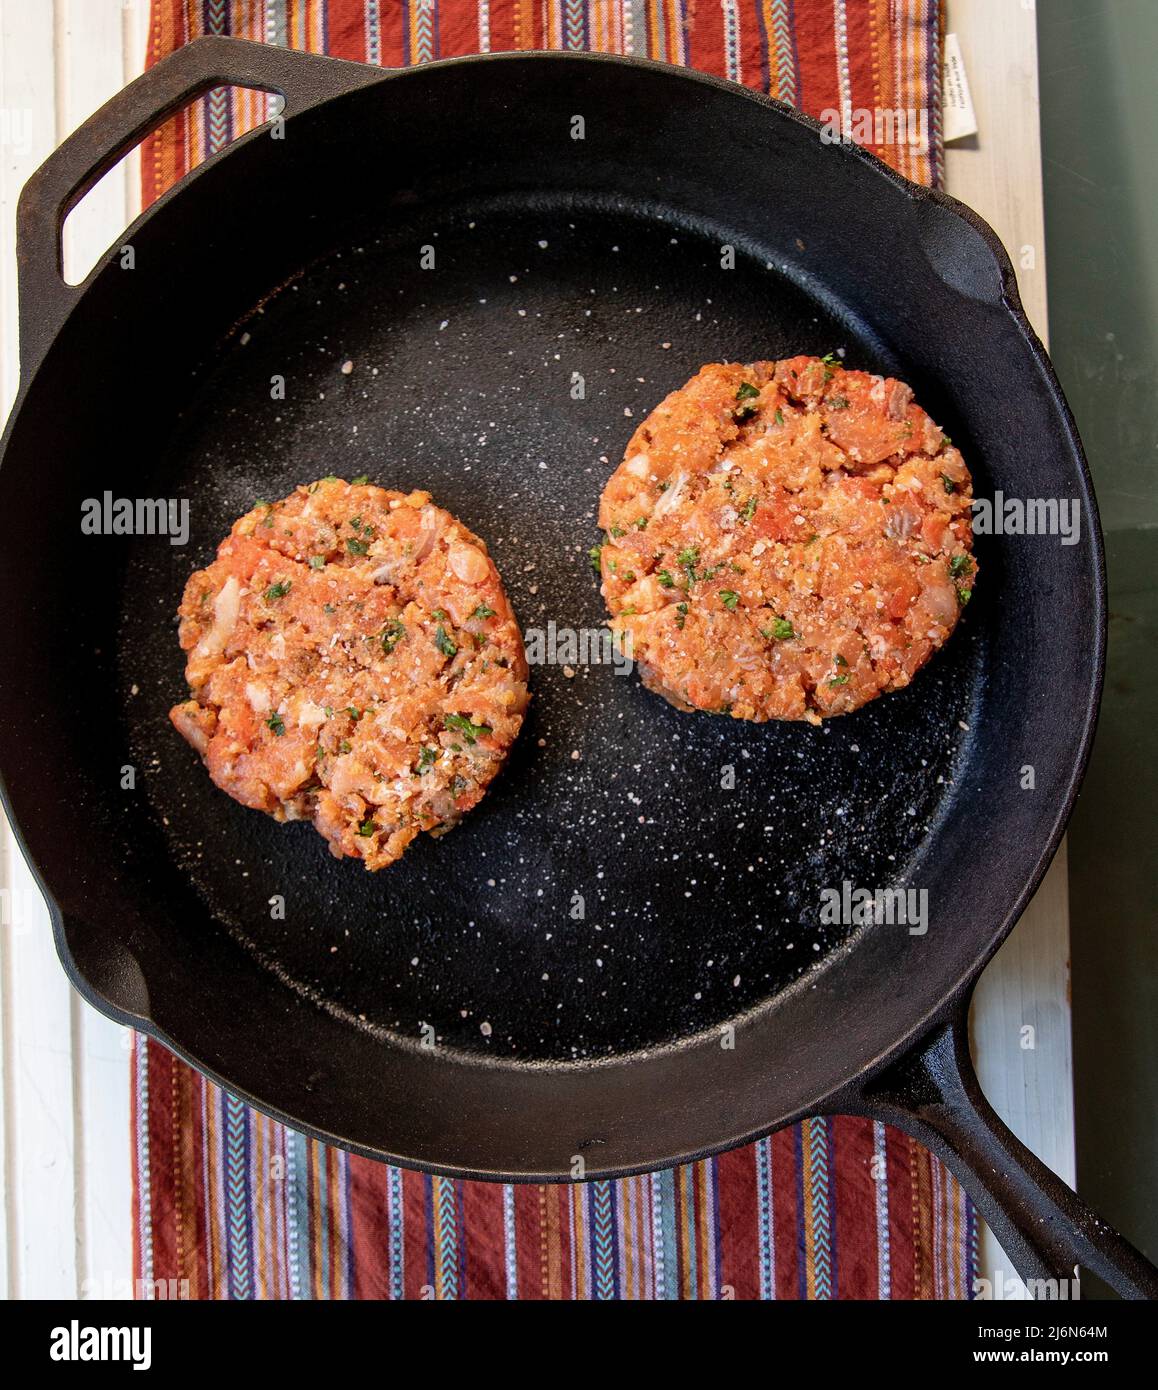 Top View of Seasoned Raw Salmon Patties on white wooden table. Stock Photo